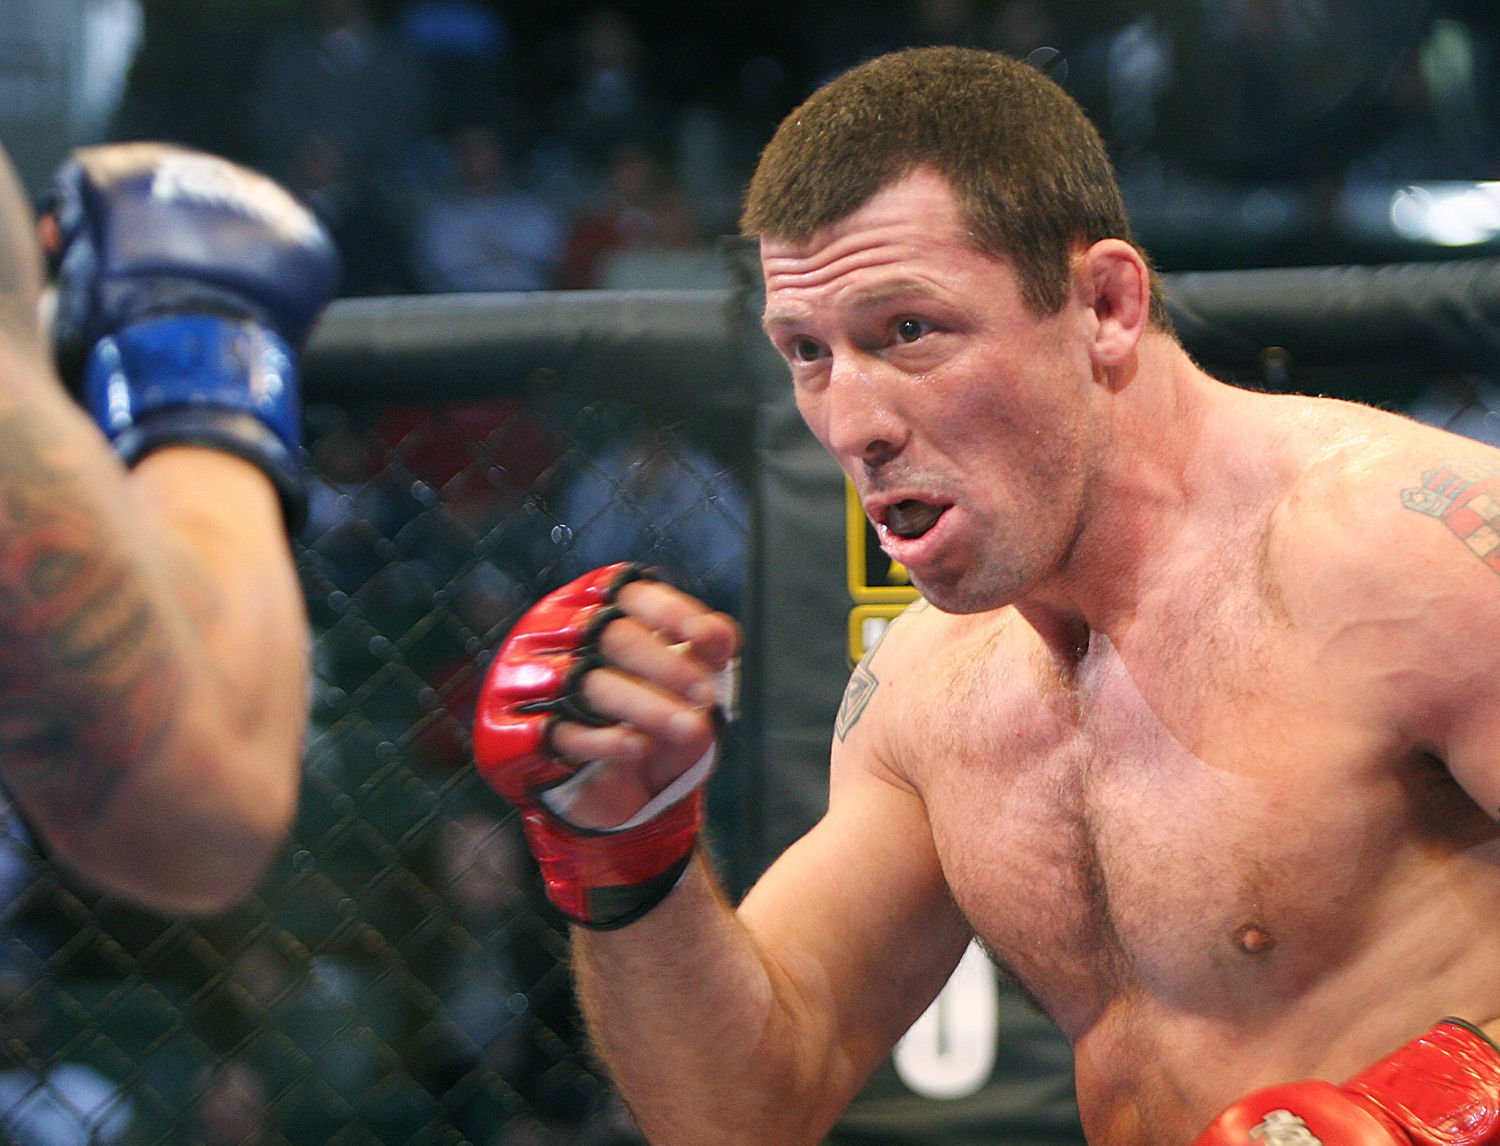 No fooling: Q-C legends Nunn and Miletich to do battle